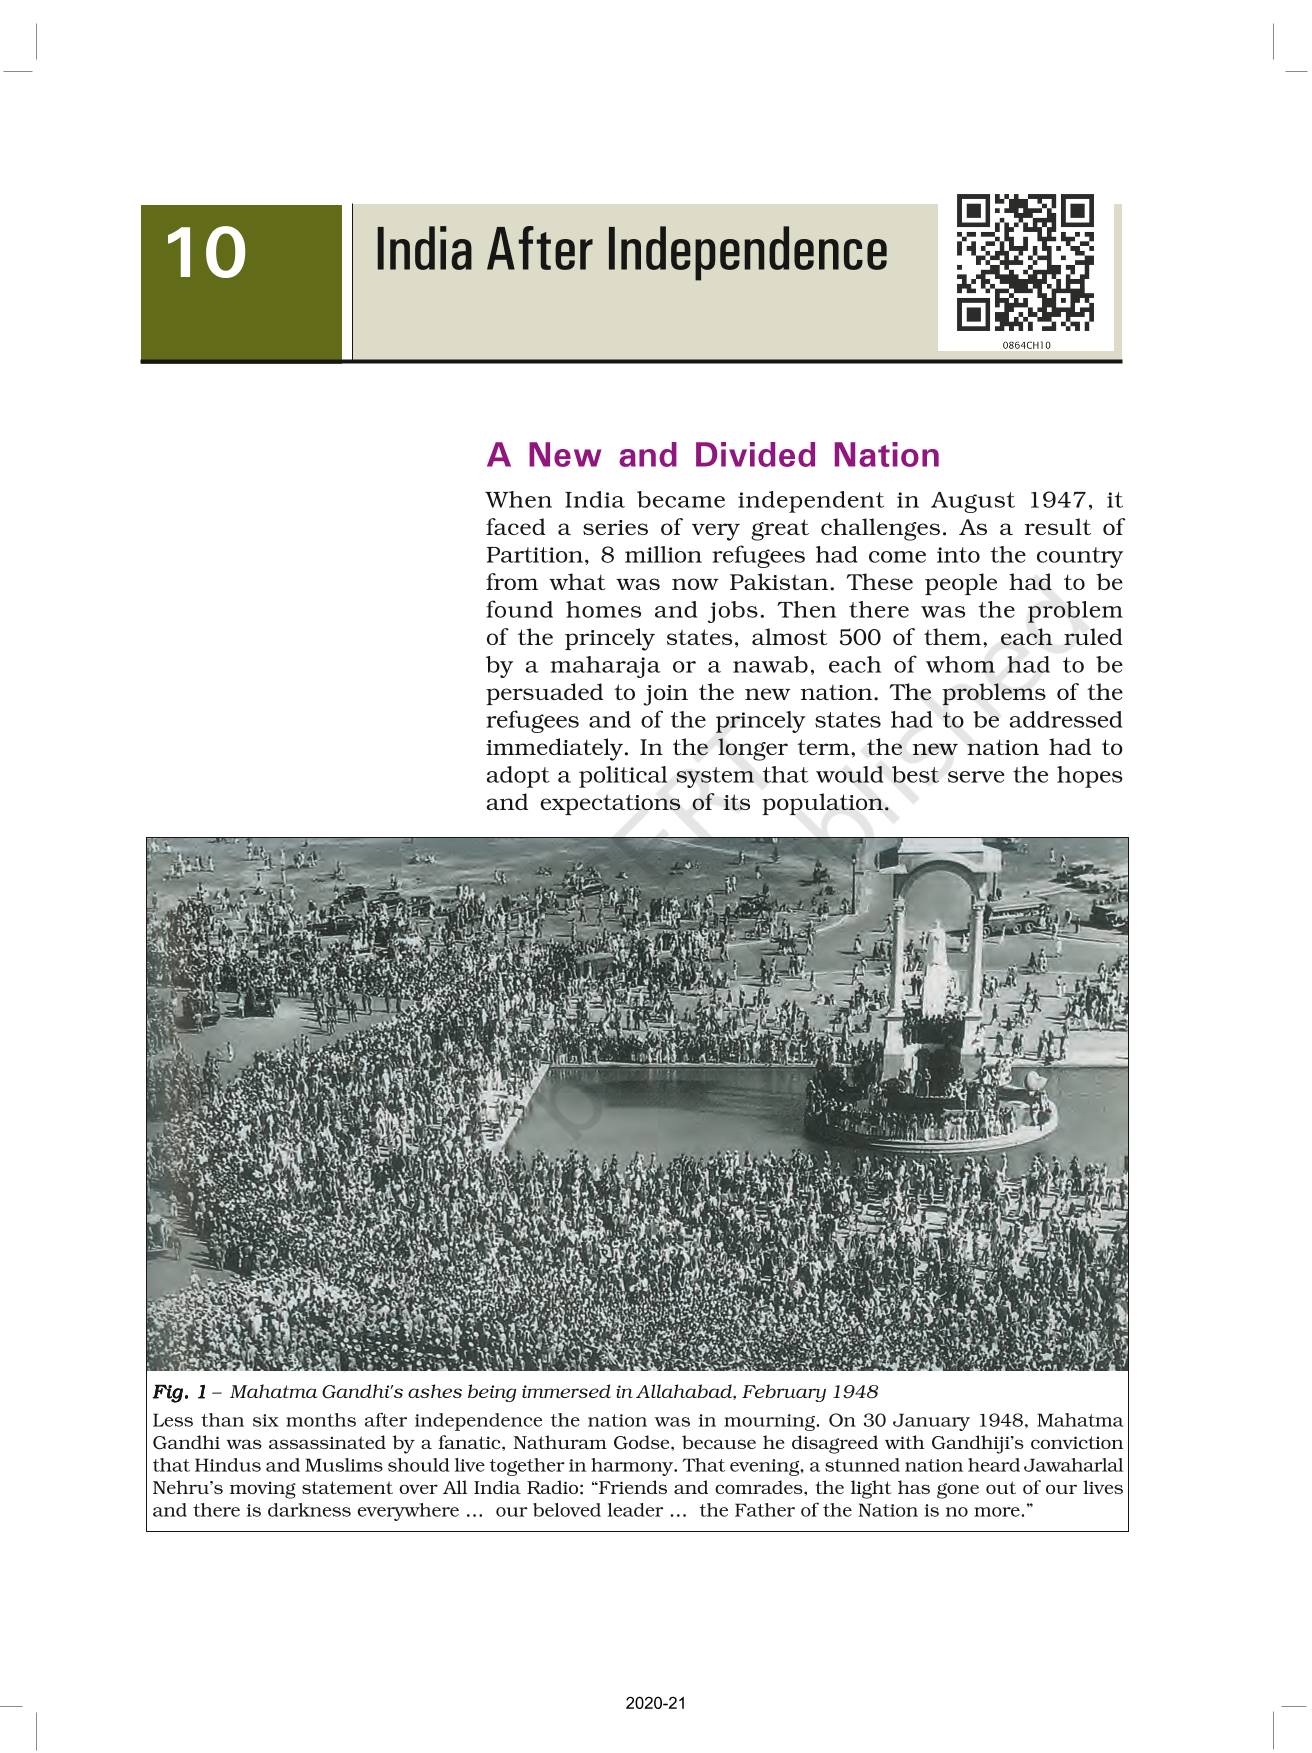 short essay on achievements of india after independence